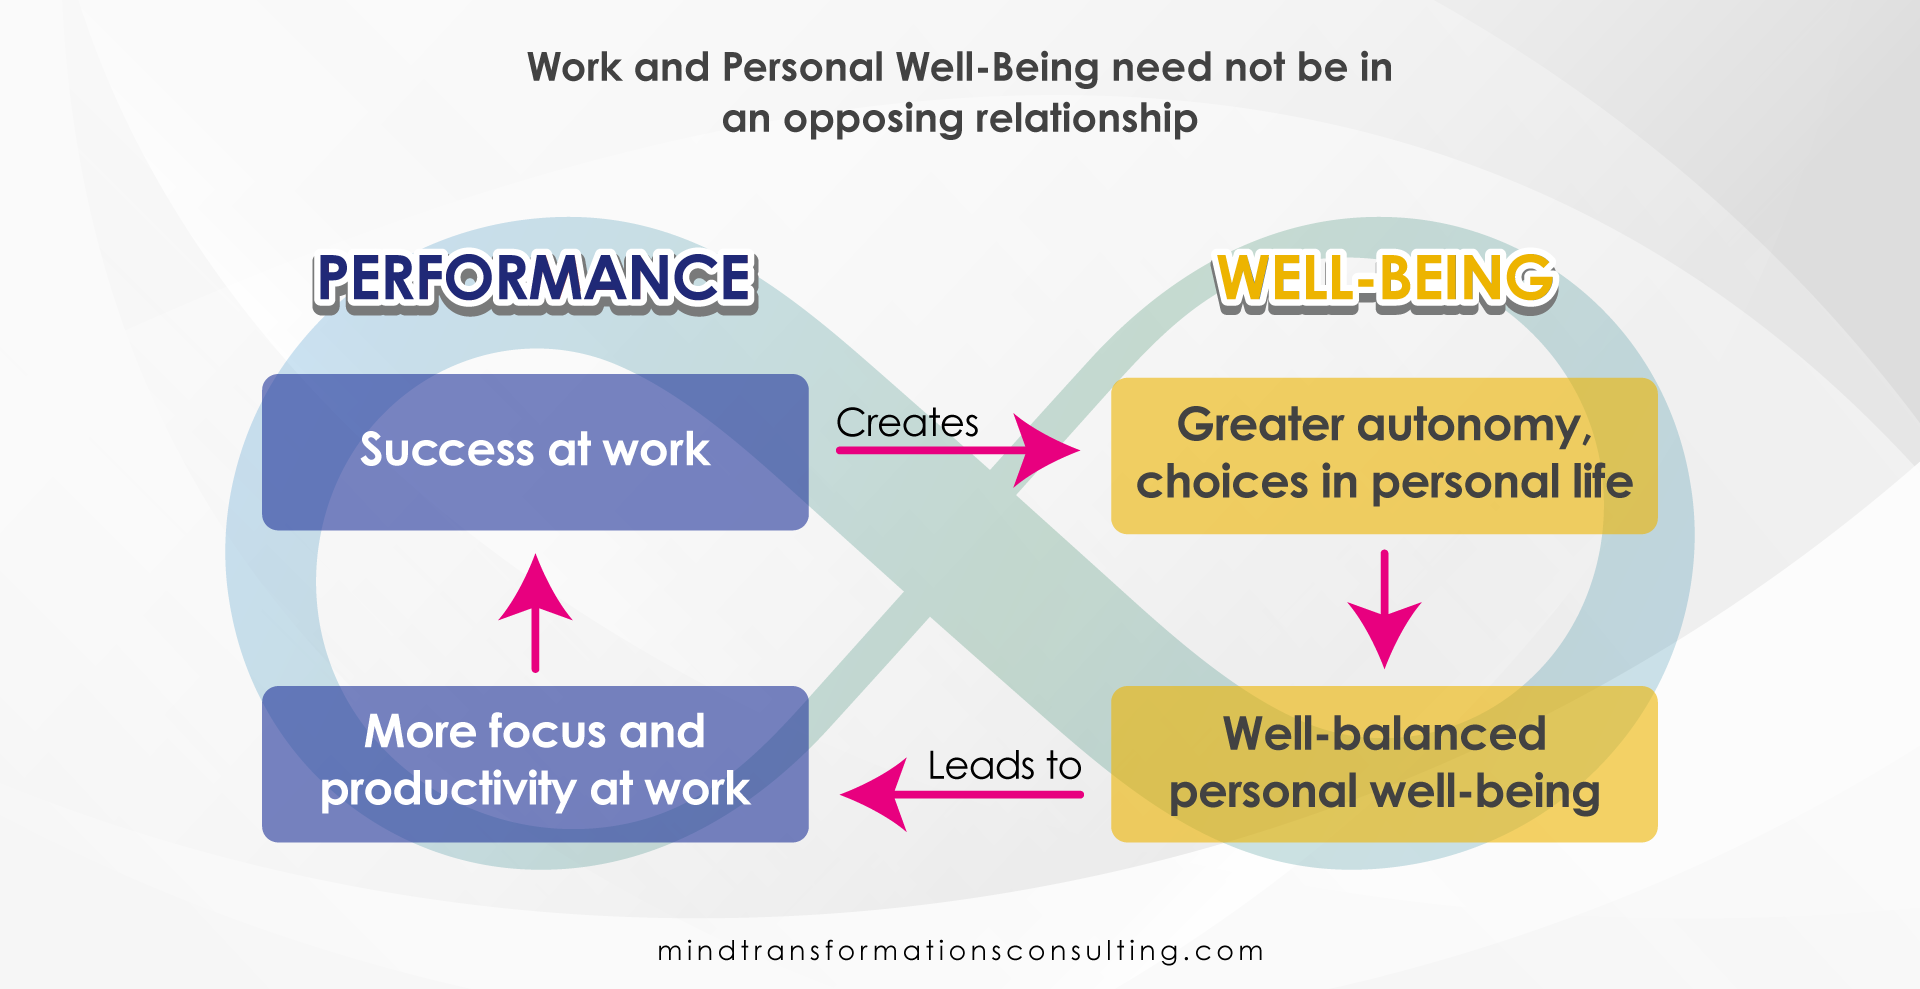 Work & Personal Well-Being need not be in opposing relationship